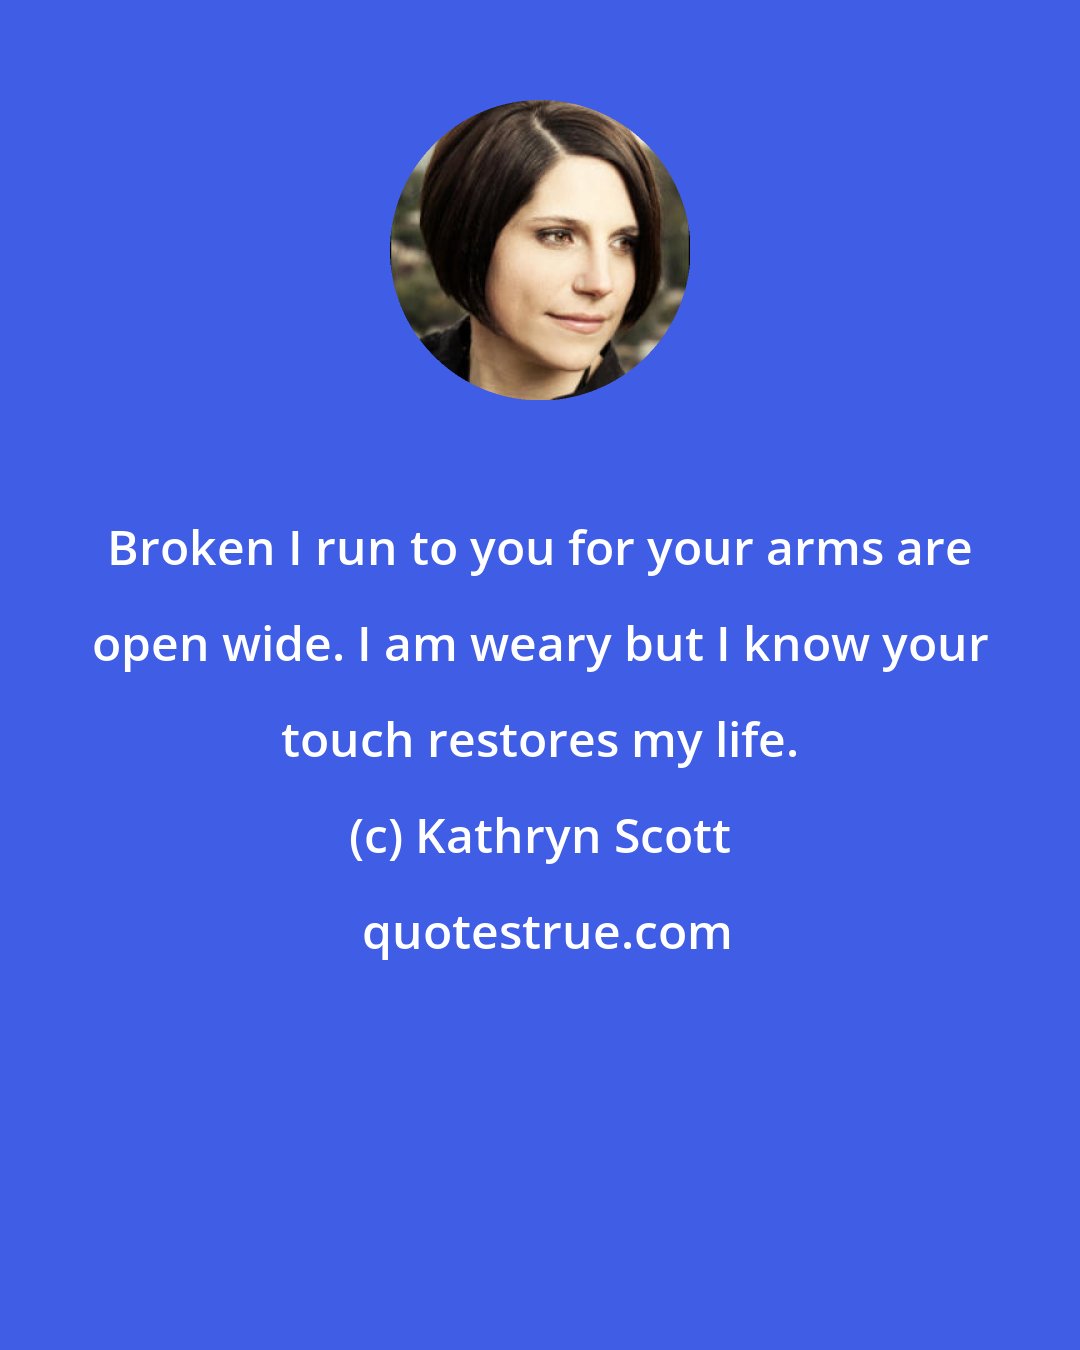 Kathryn Scott: Broken I run to you for your arms are open wide. I am weary but I know your touch restores my life.